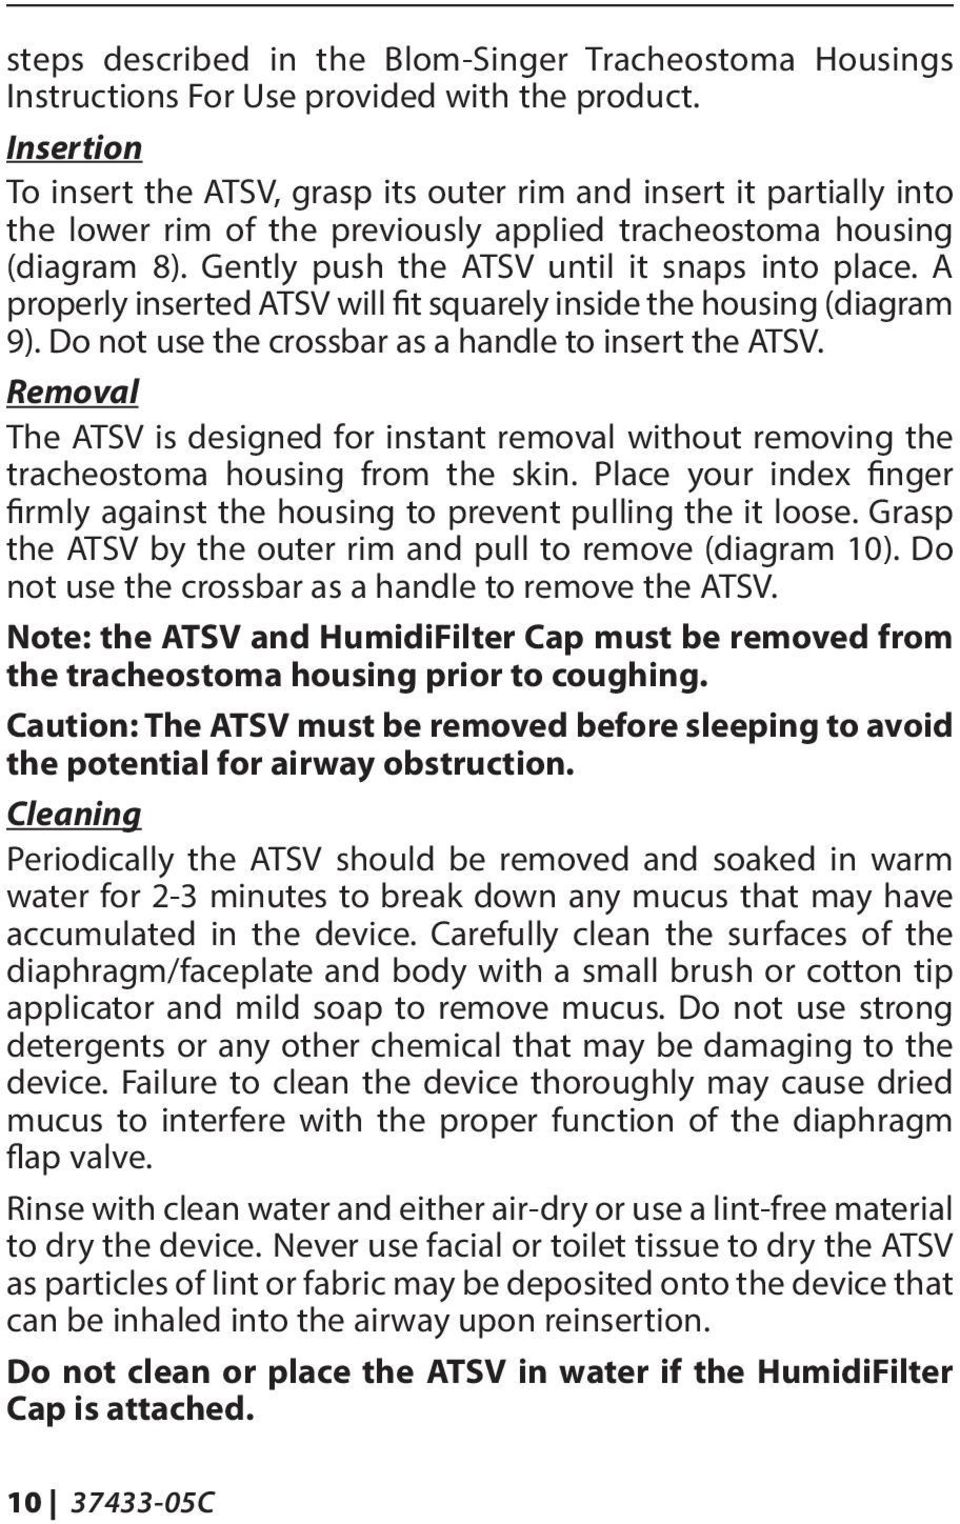 A properly inserted ATSV will fit squarely inside the housing (diagram 9). Do not use the crossbar as a handle to insert the ATSV.